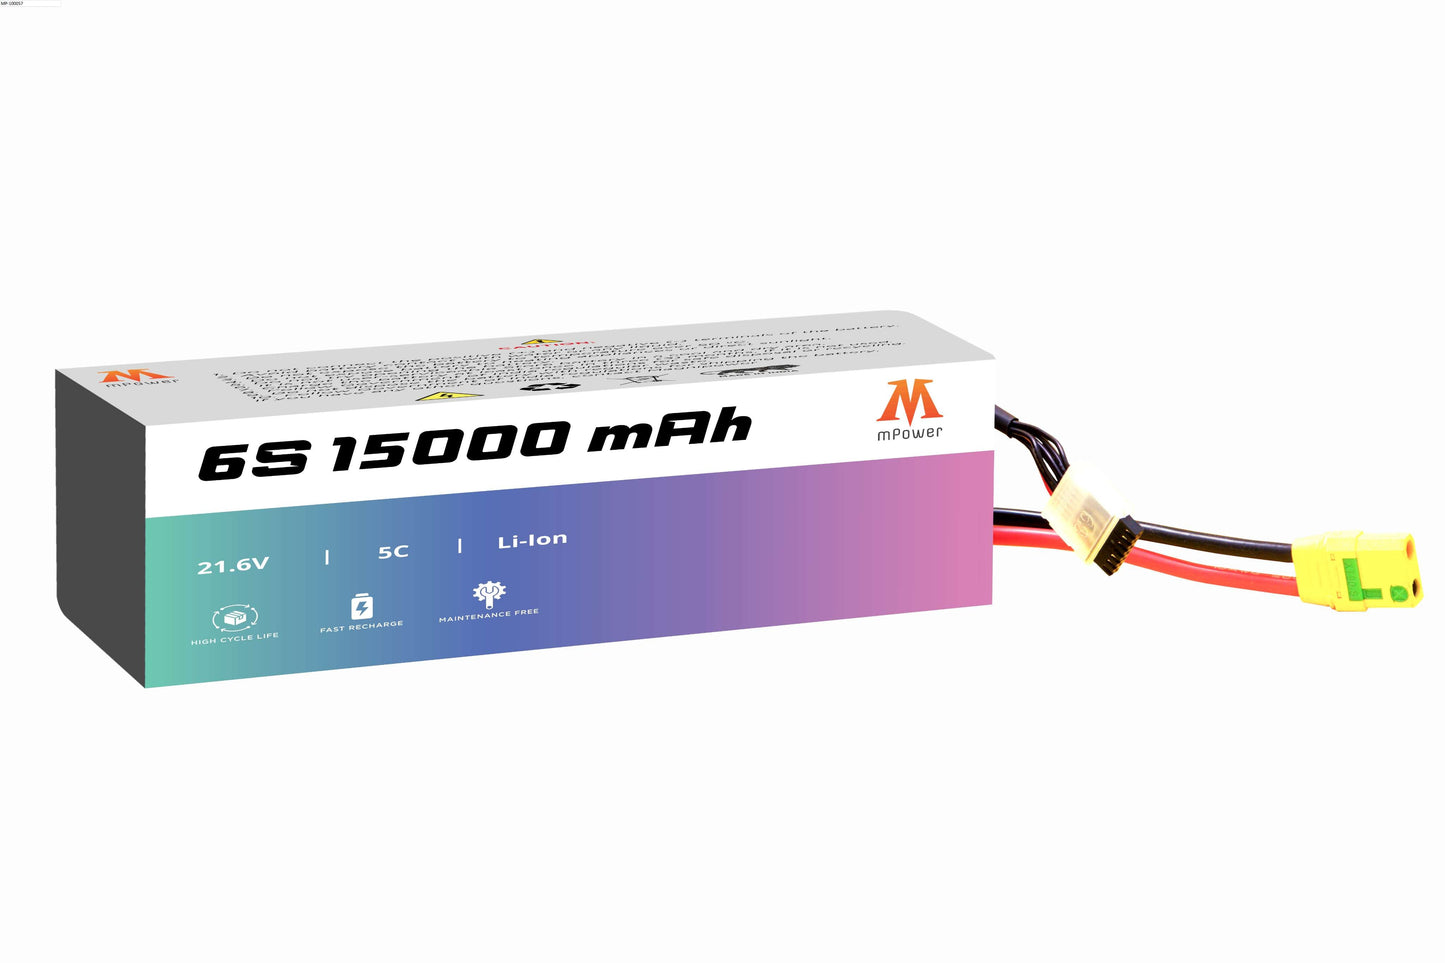 mPower 6S 15000mAh 5C Lithium-Ion Battery for Surveillance Drones